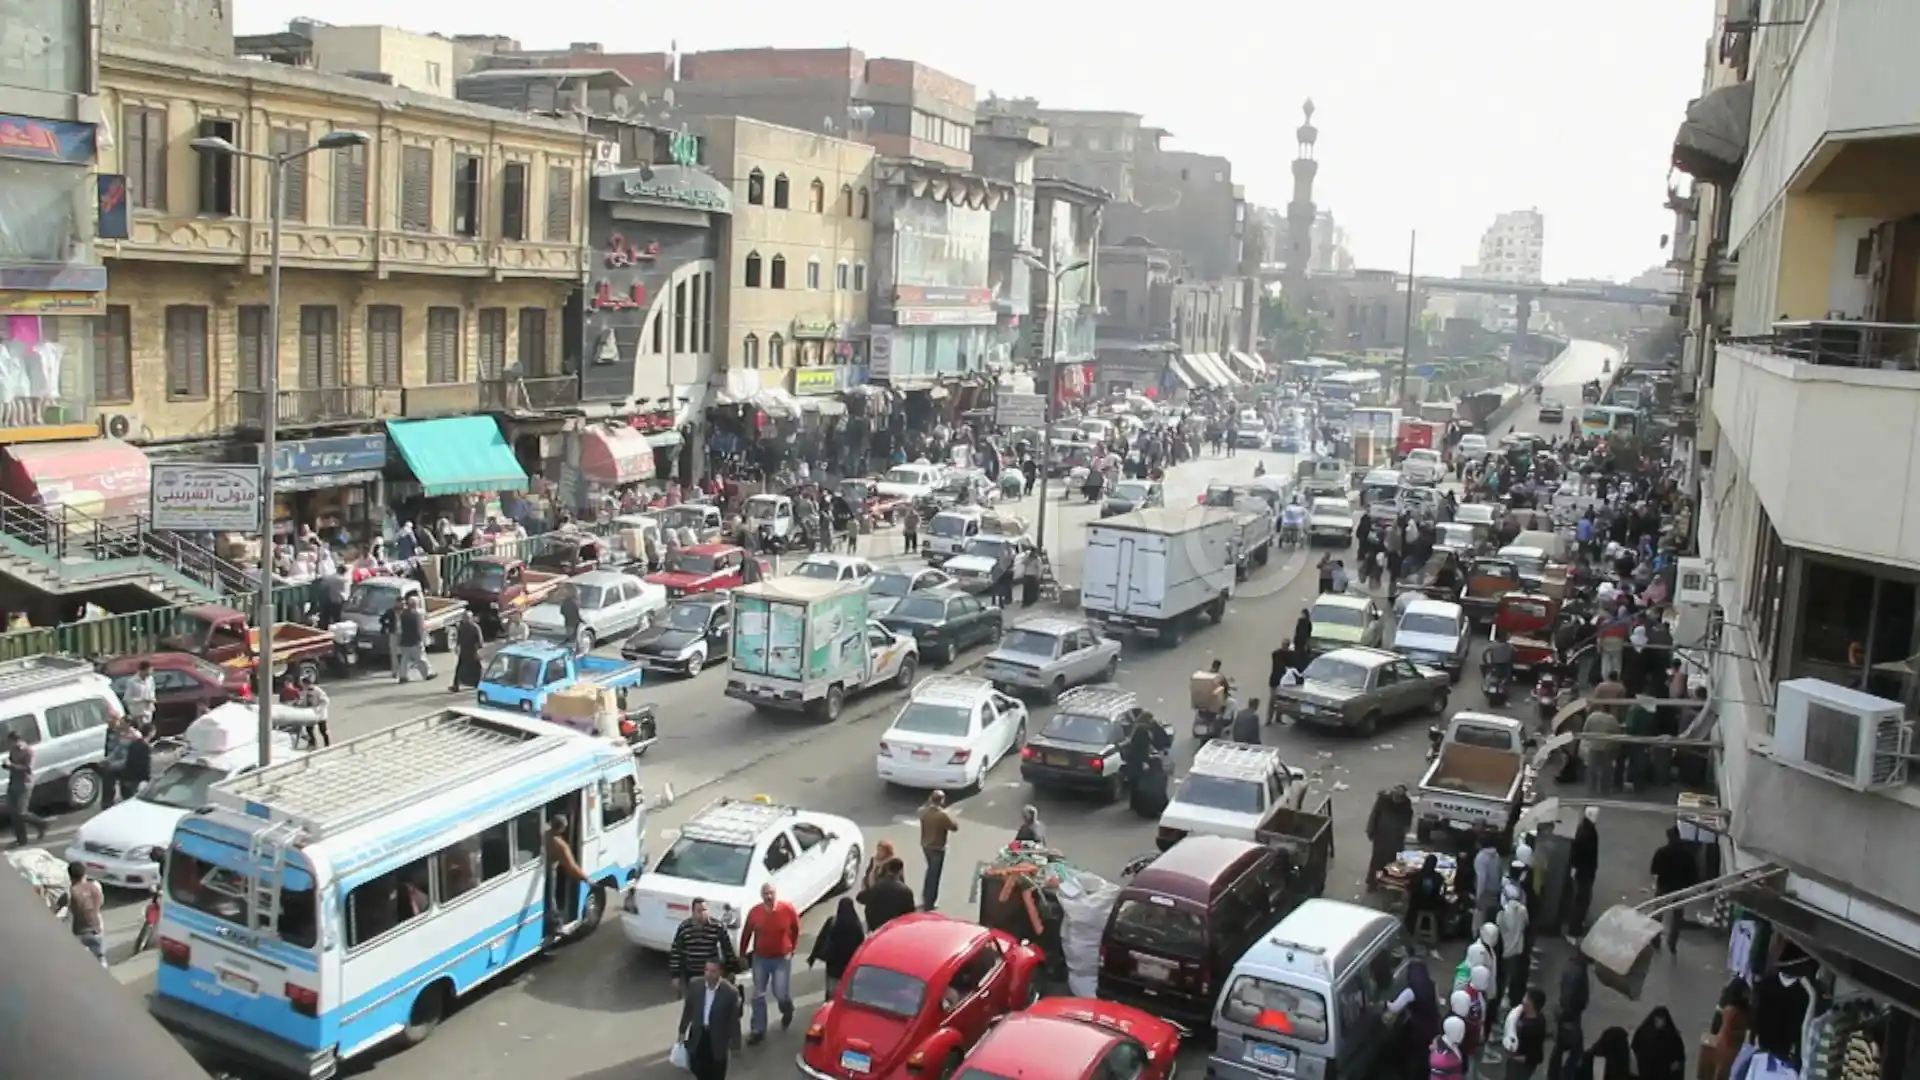 Cairo's Bustling Streets